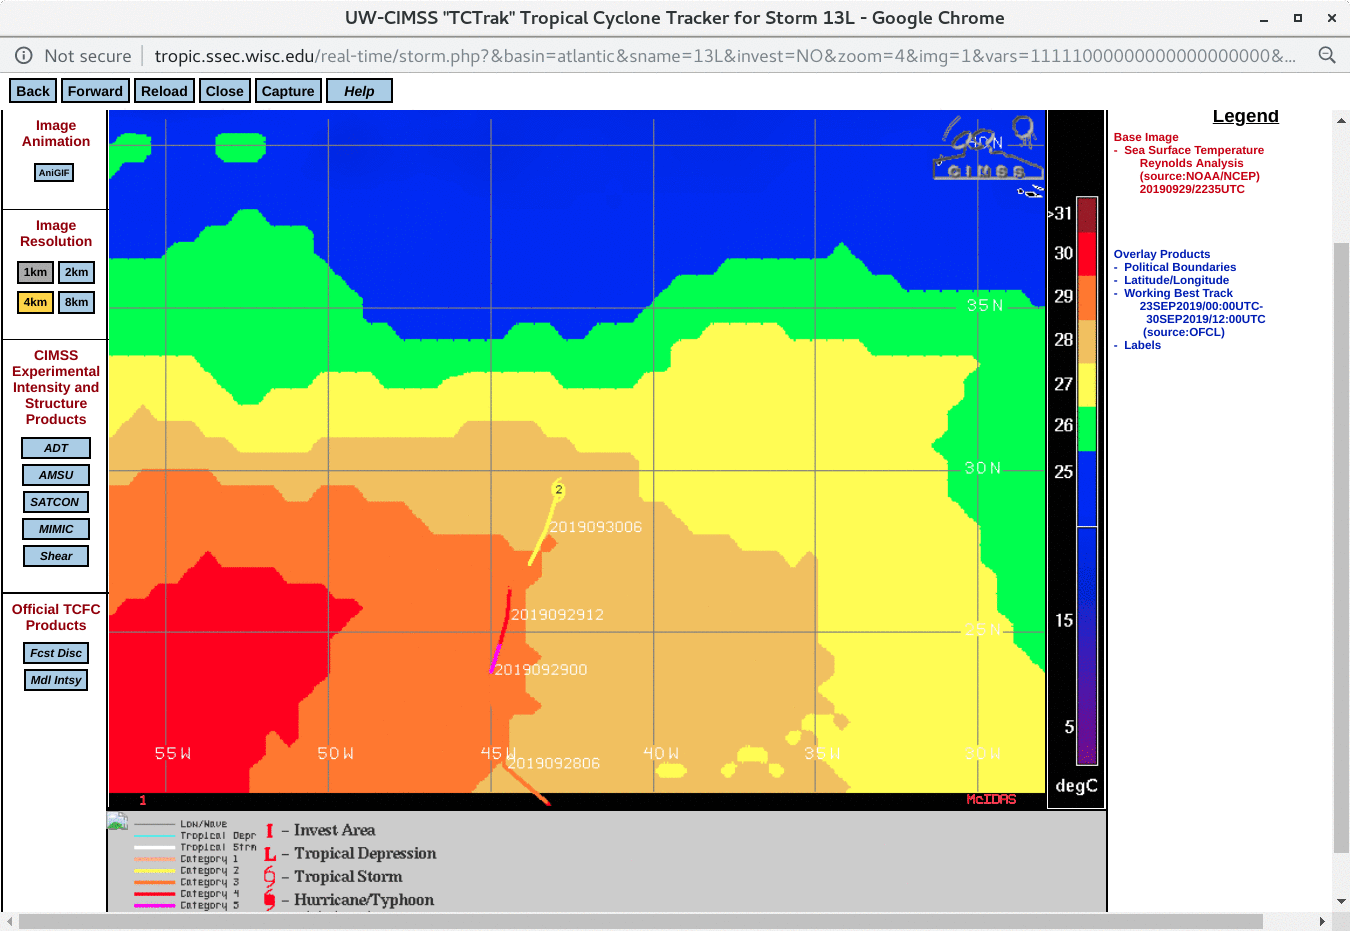 Sea Surface Temperature and Ocean Heat Content on 29 September, with a plot of the track/intensity of Lorenzo [click to enlarge]